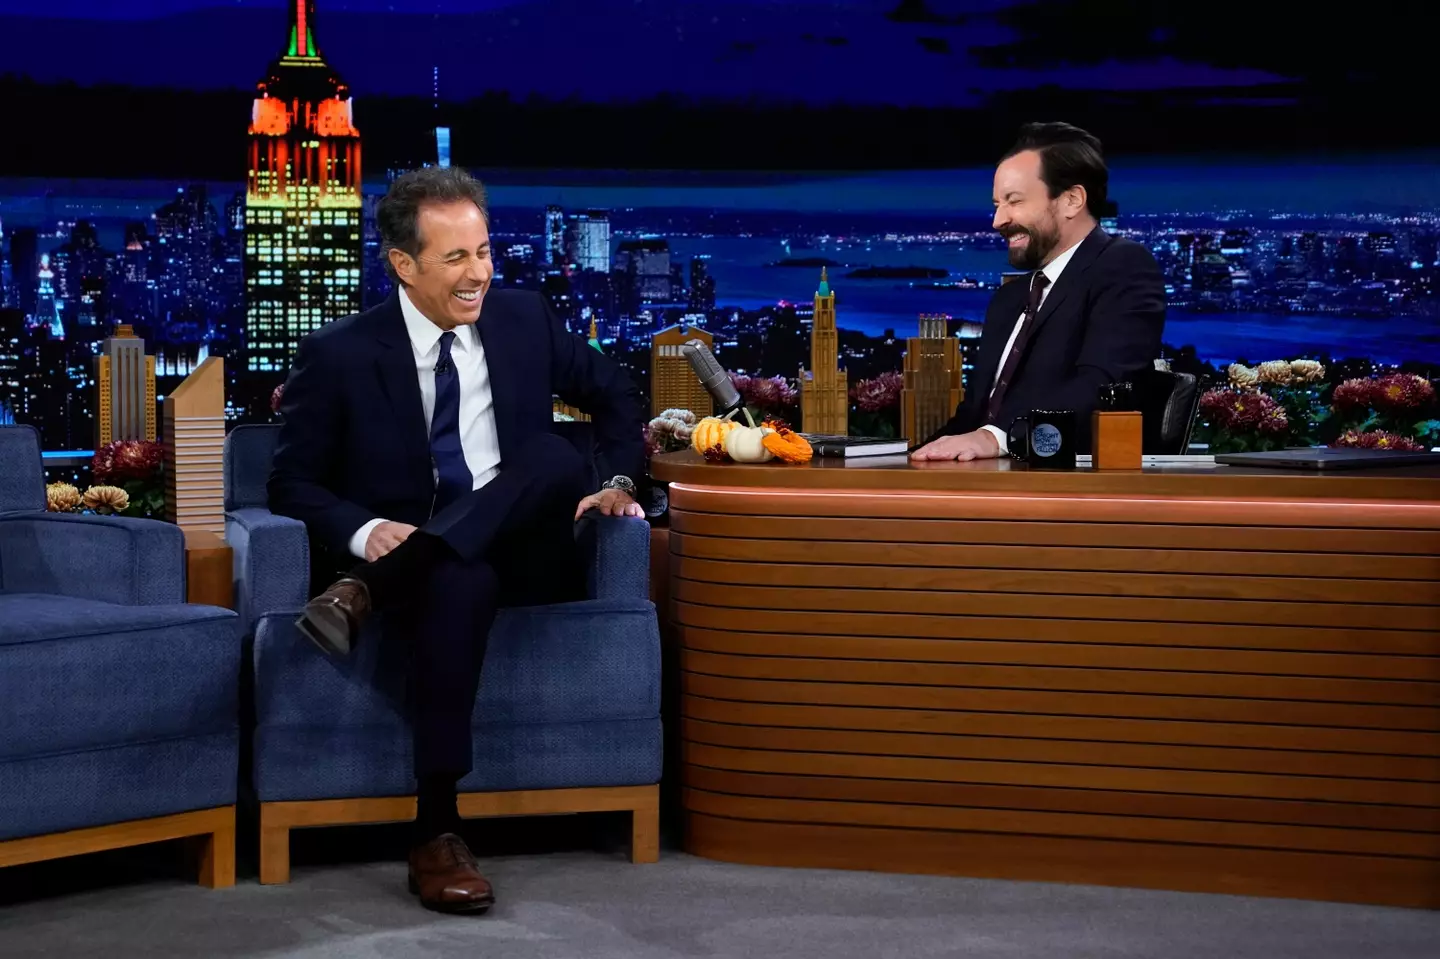 Seinfeld was mentioned in the accusations against Fallon.